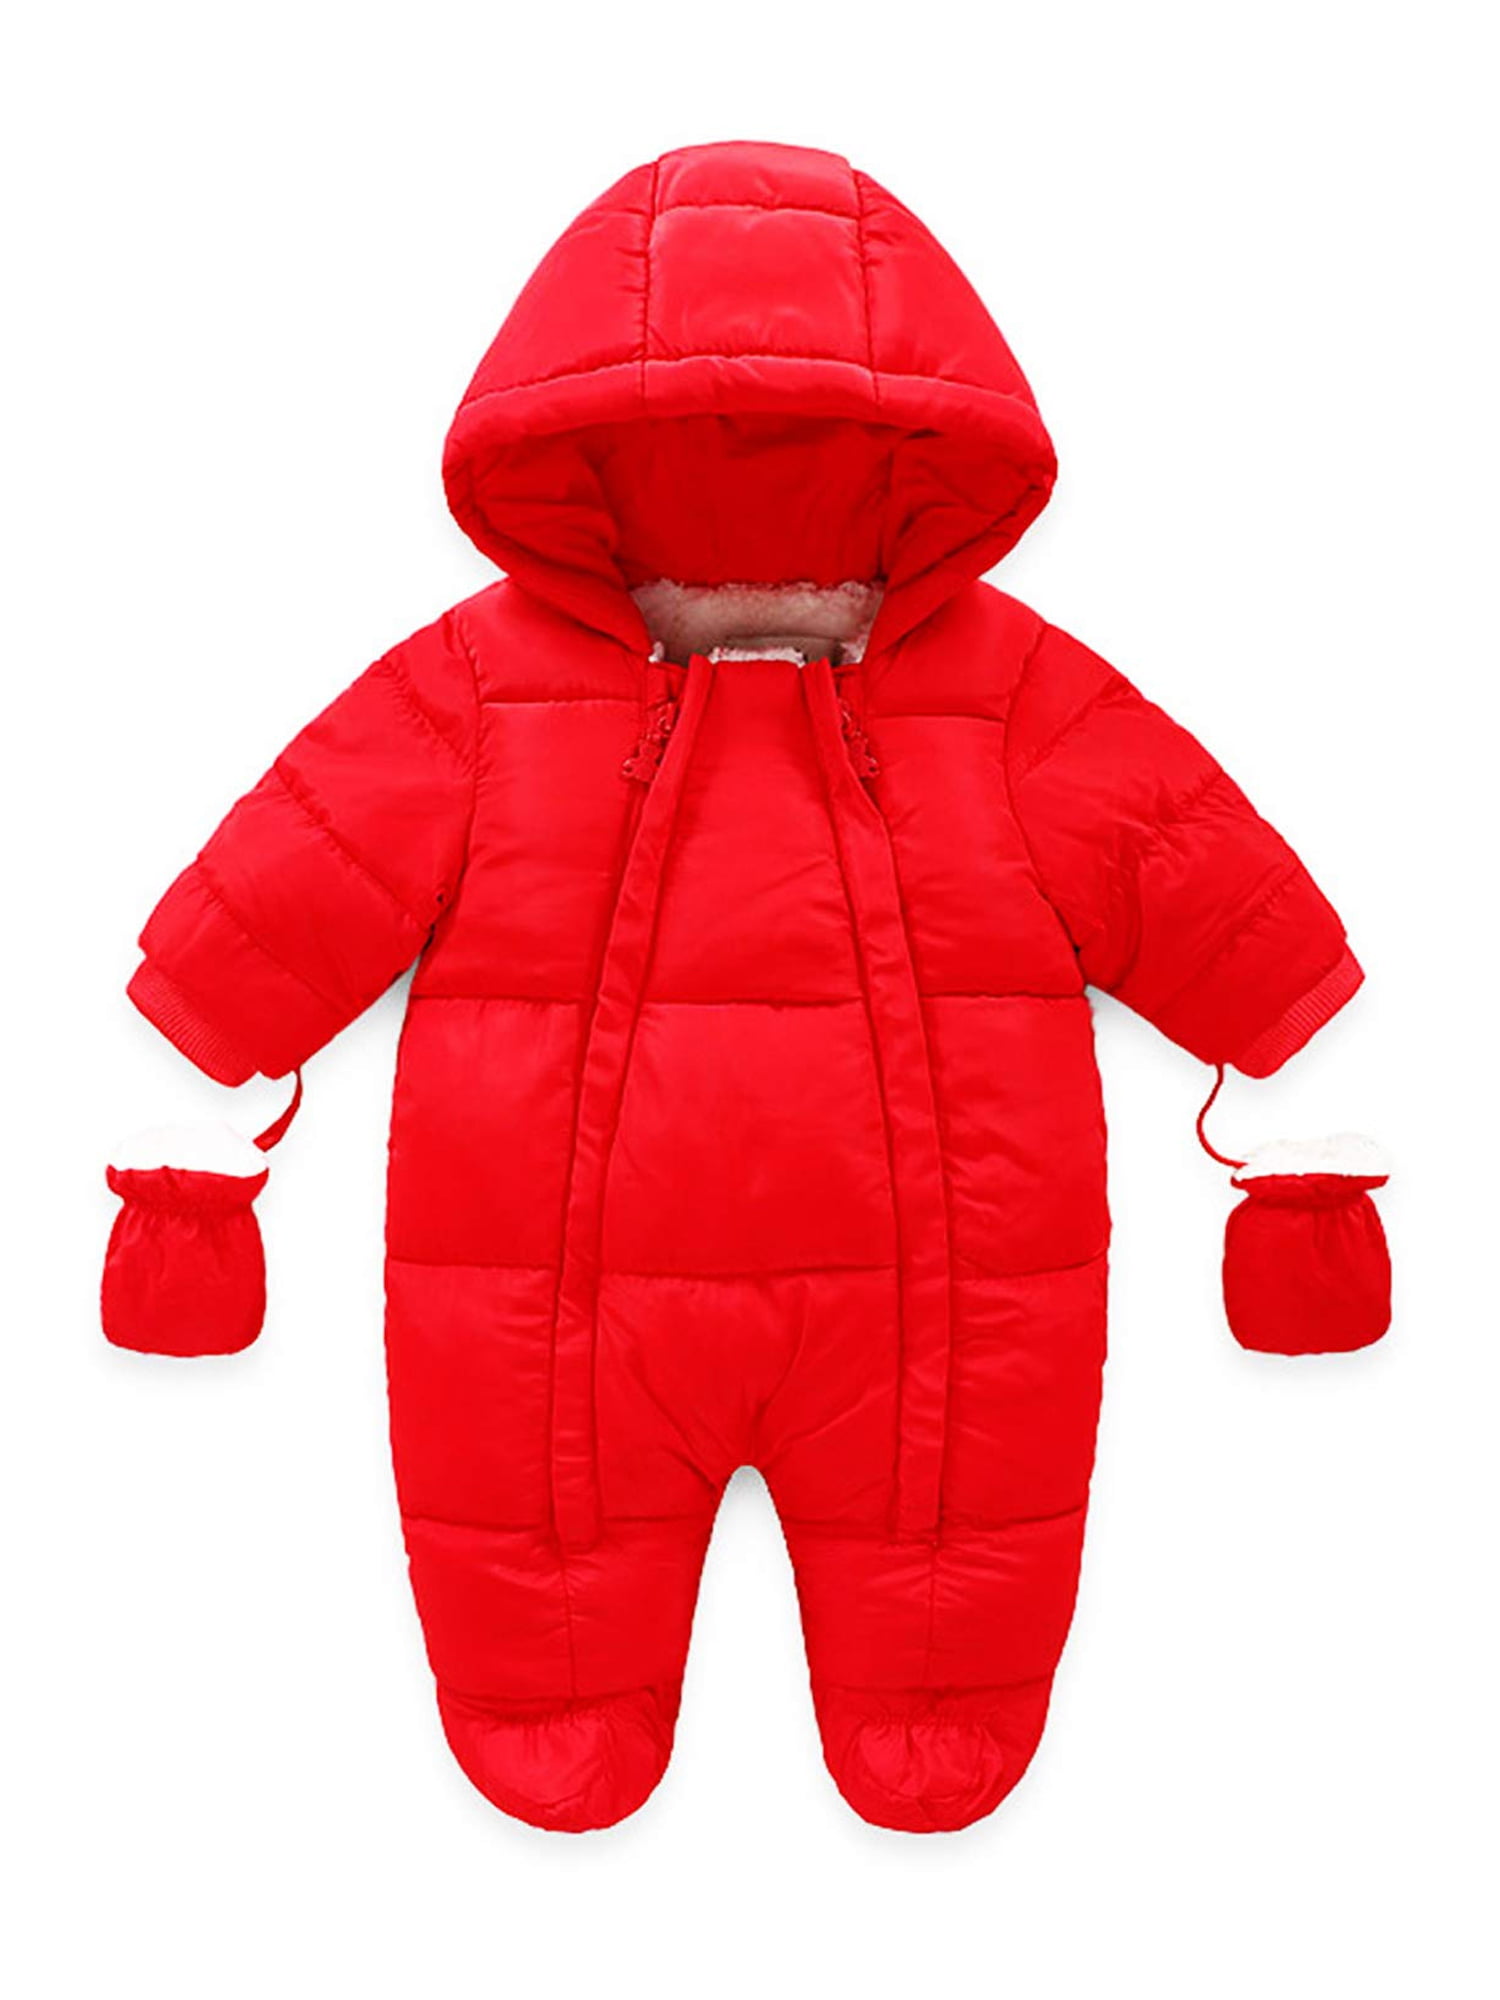 LSHDCER Baby Snowsuit Winter 2 Piece Warm Snow Suit Hooded Down Coat and Down Pants Outfits Set Girls Boys Winter Ski Suit 